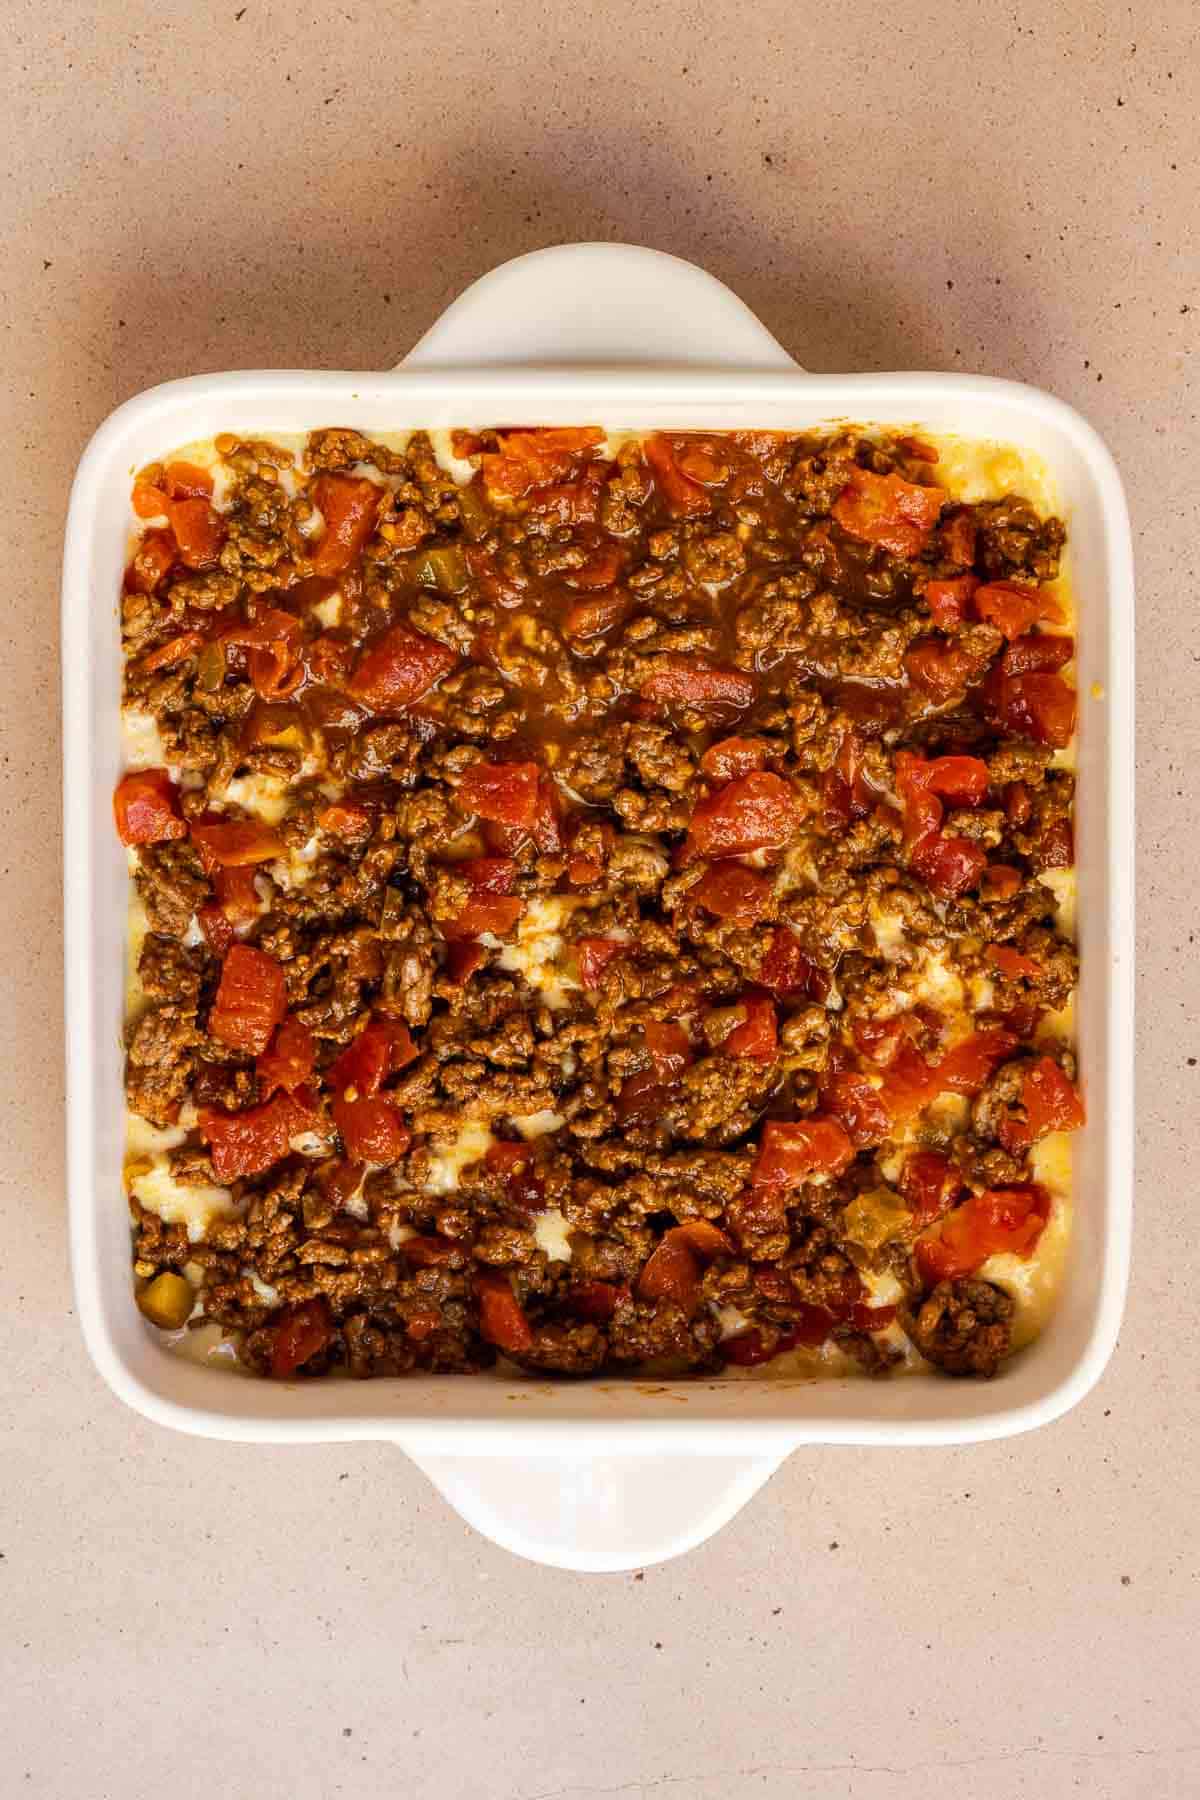 The ground beef mixture is spread evenly over top of the cornbread layer in the 8 by 8 inch baking dish.